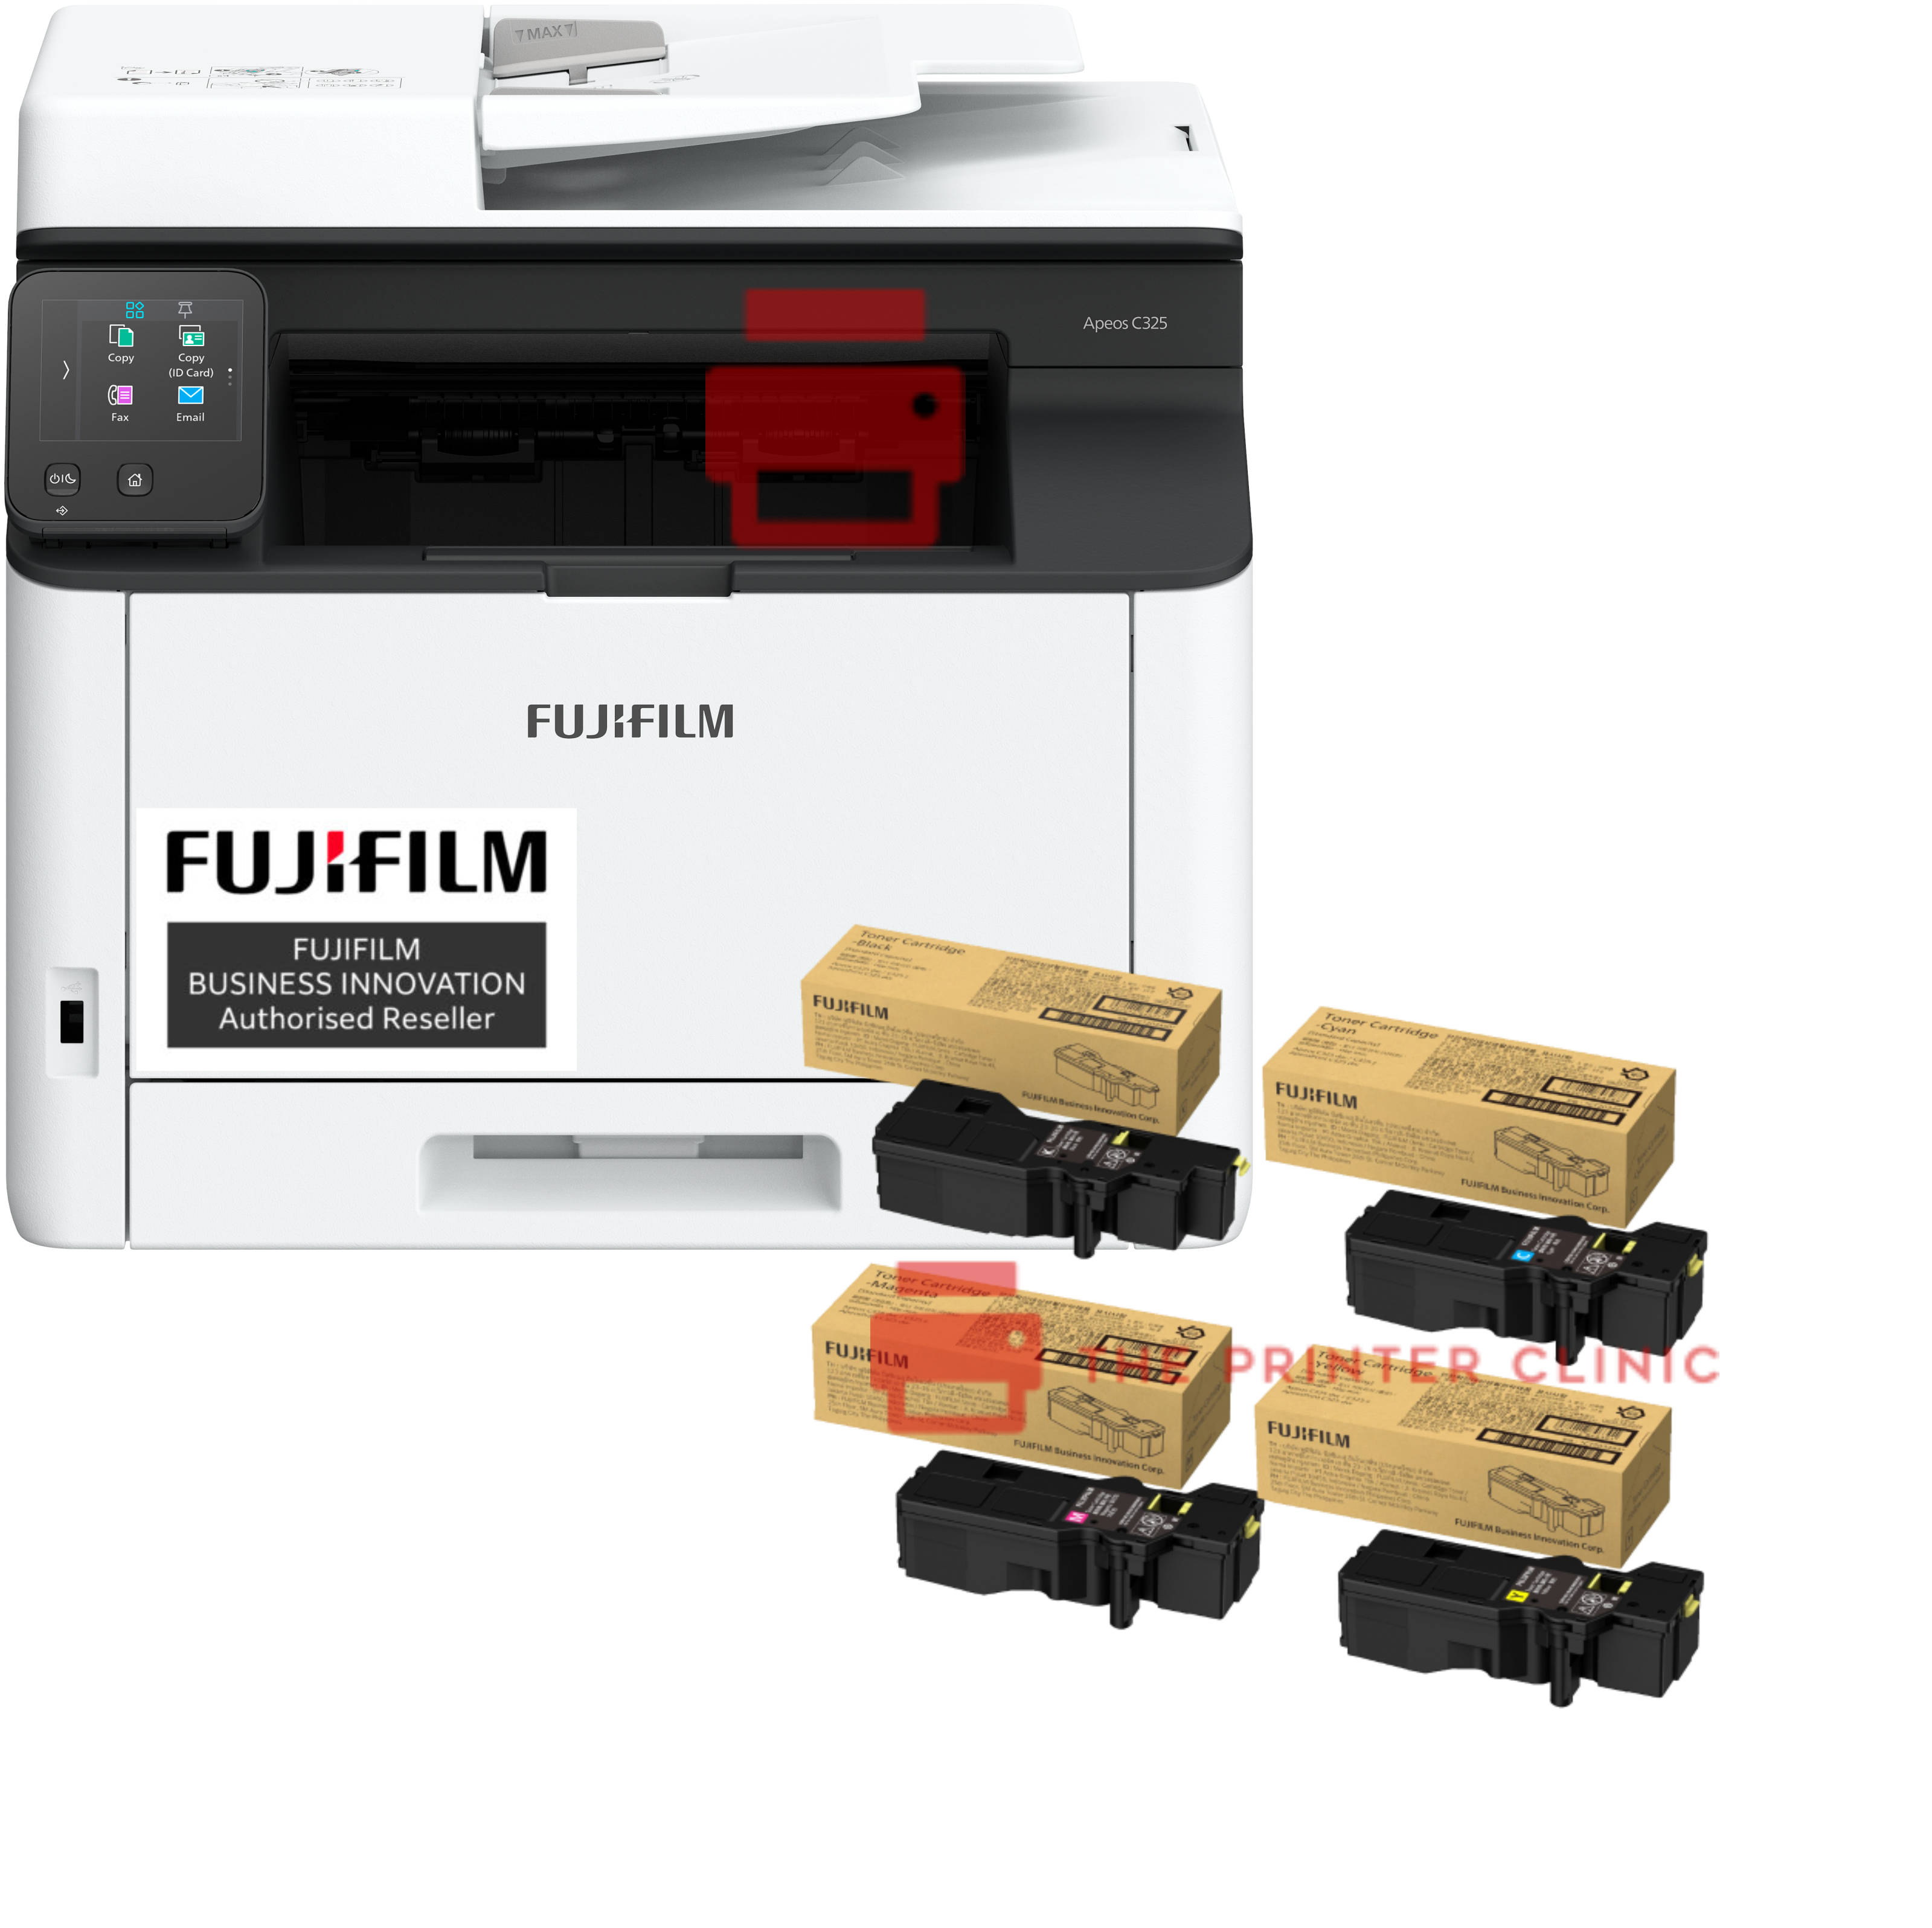 FUJIFILM Apeos C325z Wireless A4 Colour Multifunction Printer with Extra Set of Genuine Toner & 3Y WTY (OUR BEST DEAL)